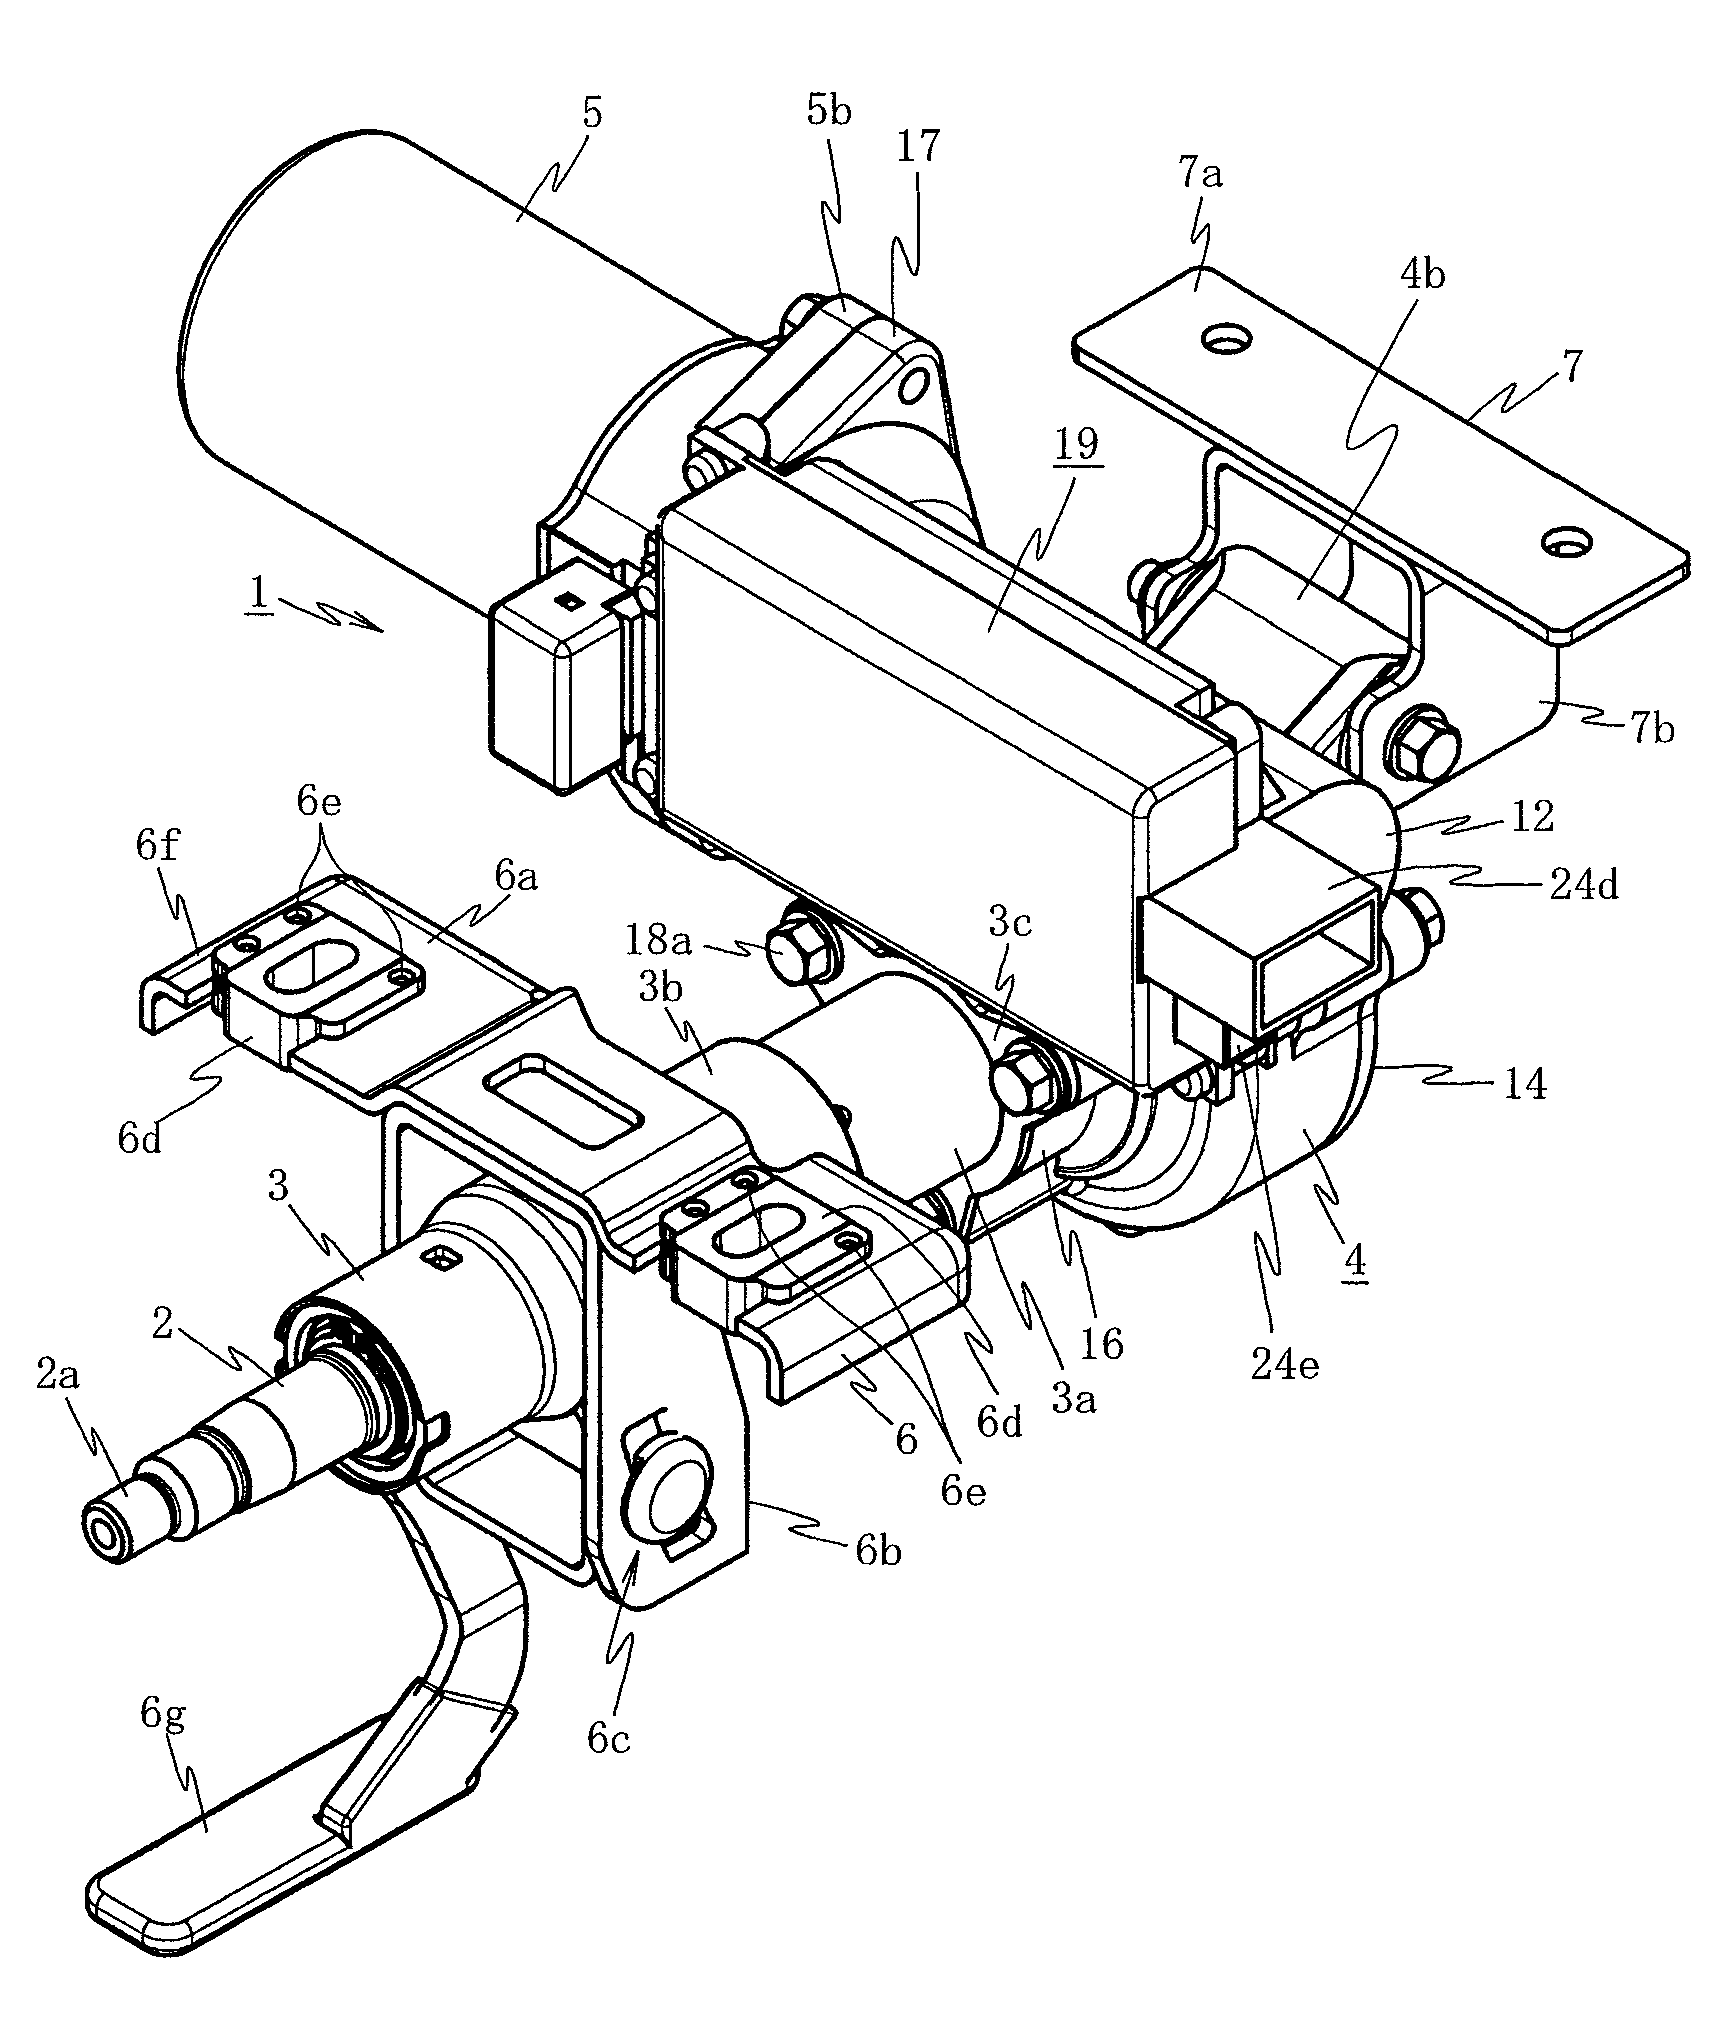 Electric power steering apparatus and method of assembling the same